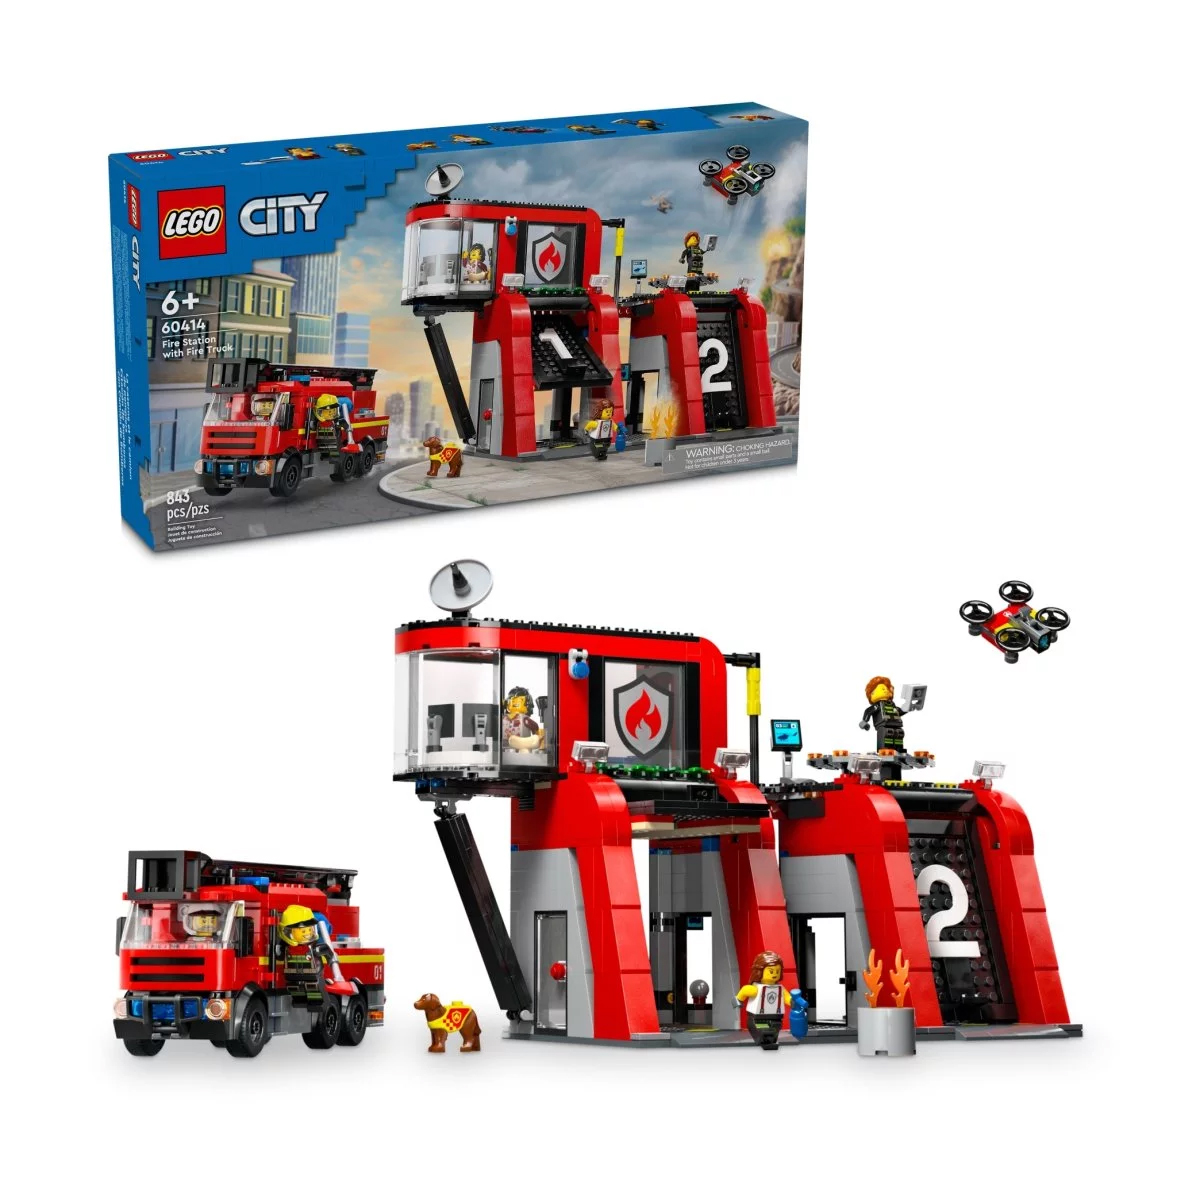 lego city 60414 fire station with fire truck 843 дет Конструктор Lego City Fire Station with Fire Truck 60414, 843 детали